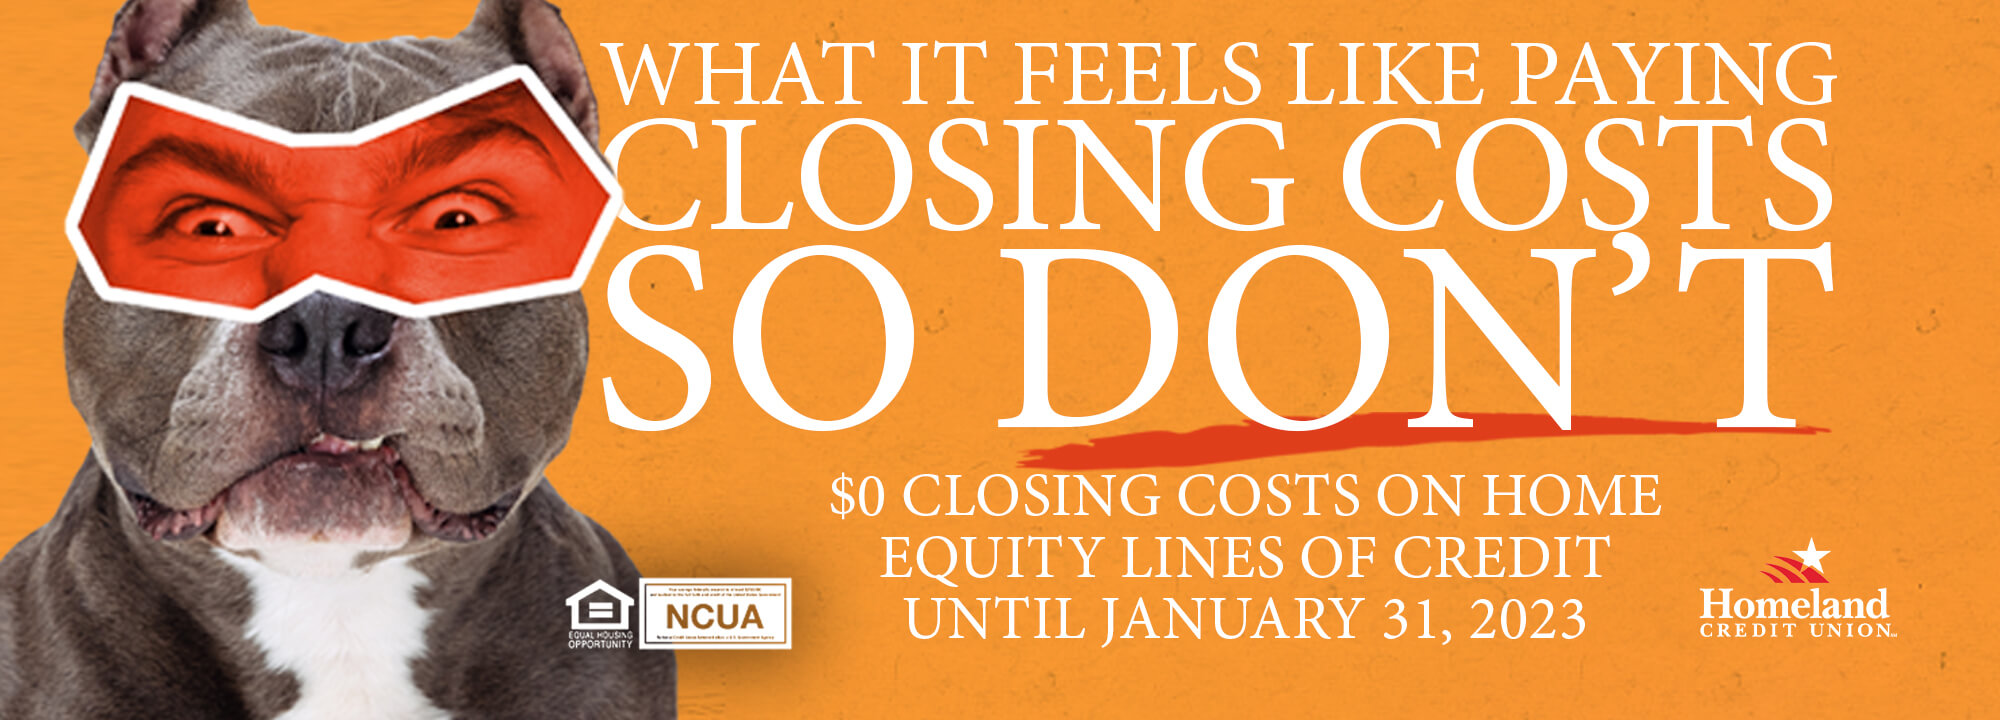 What is feels like paying closing costs so don't. $0 closing costs on home equity lines of credit until January 31, 2023